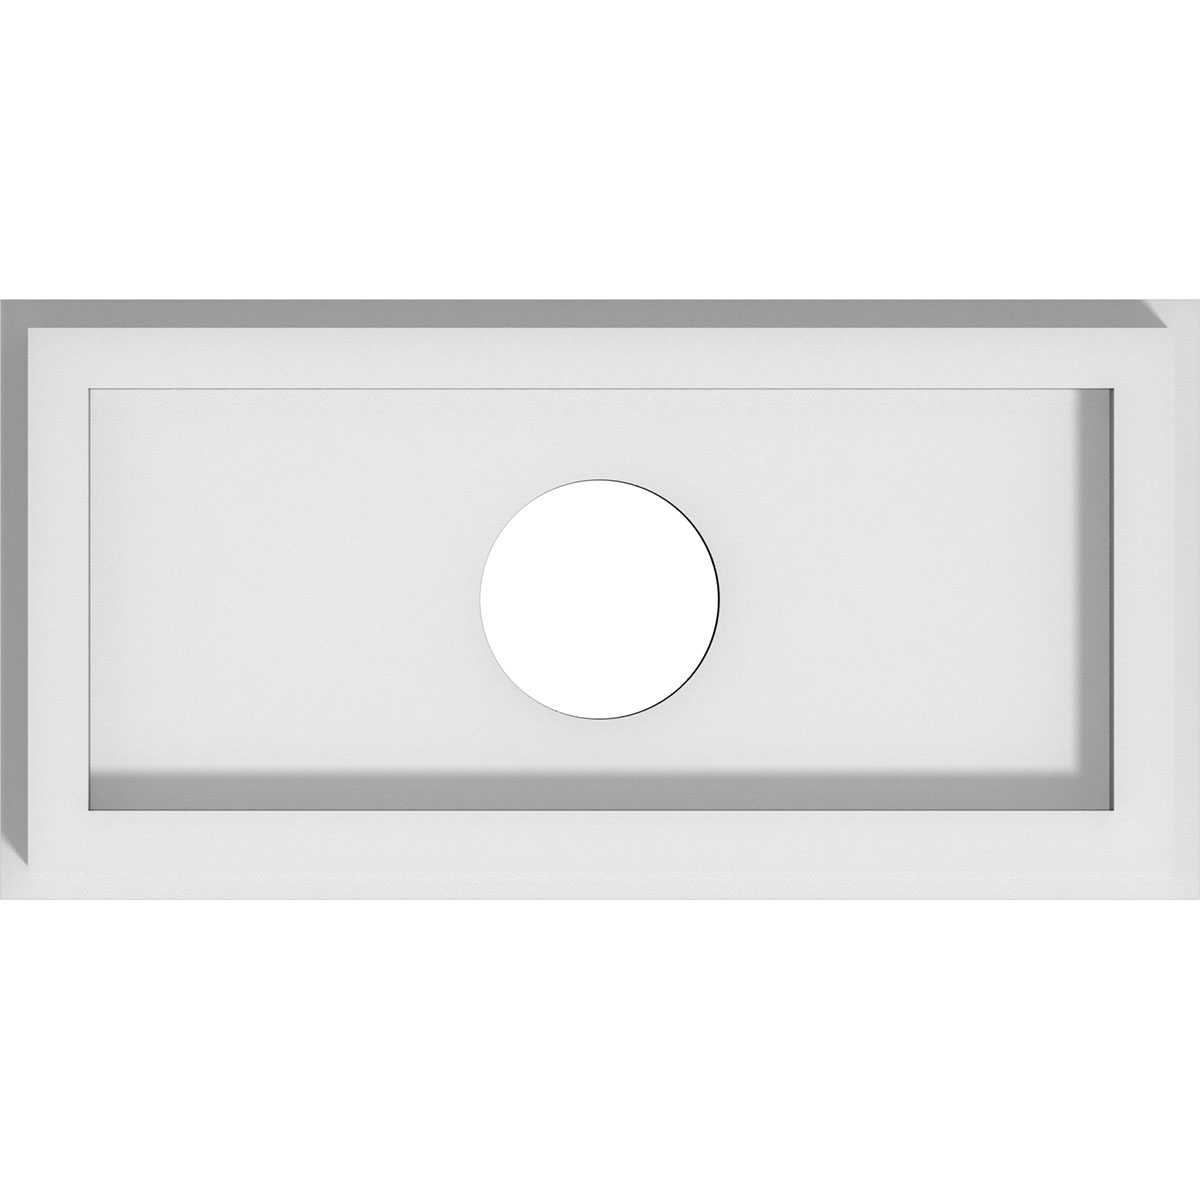 Cmp10x5re-02000 2 In. Id X 3.5 In. Rectangle Architectural Grade Pvc Contemporary Ceiling Medallion